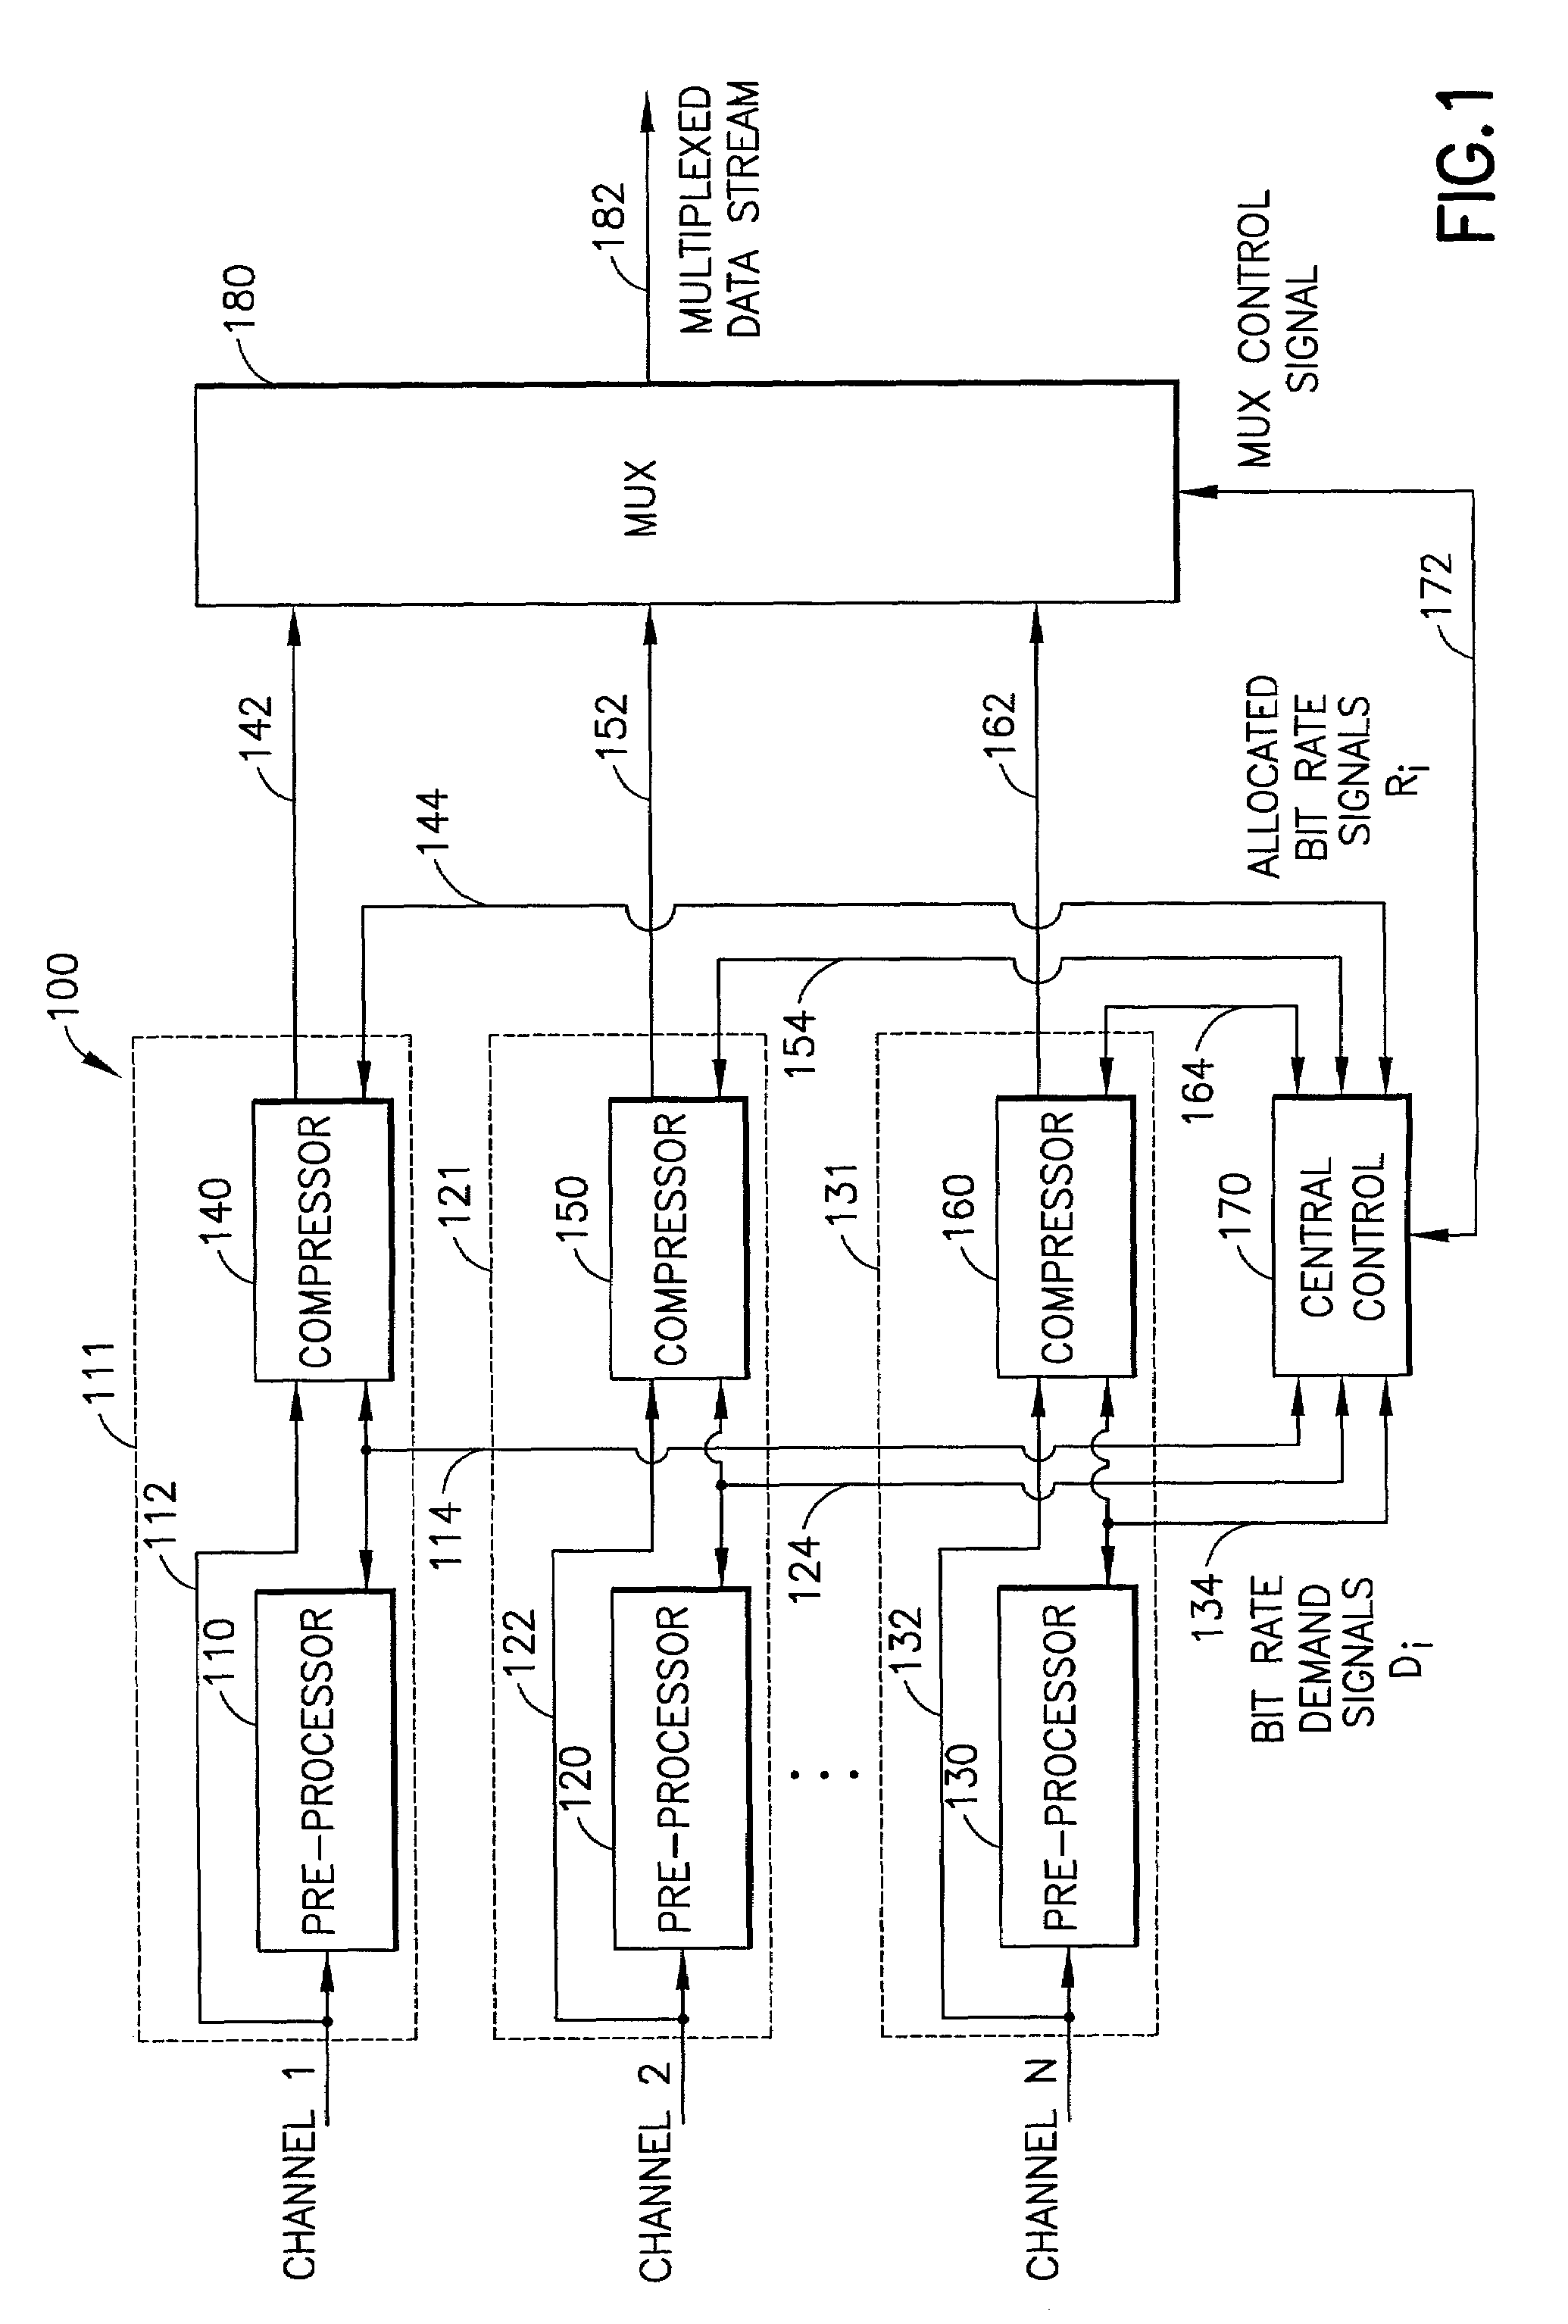 Pre-processing of bit rate allocation in a multi-channel video encoder